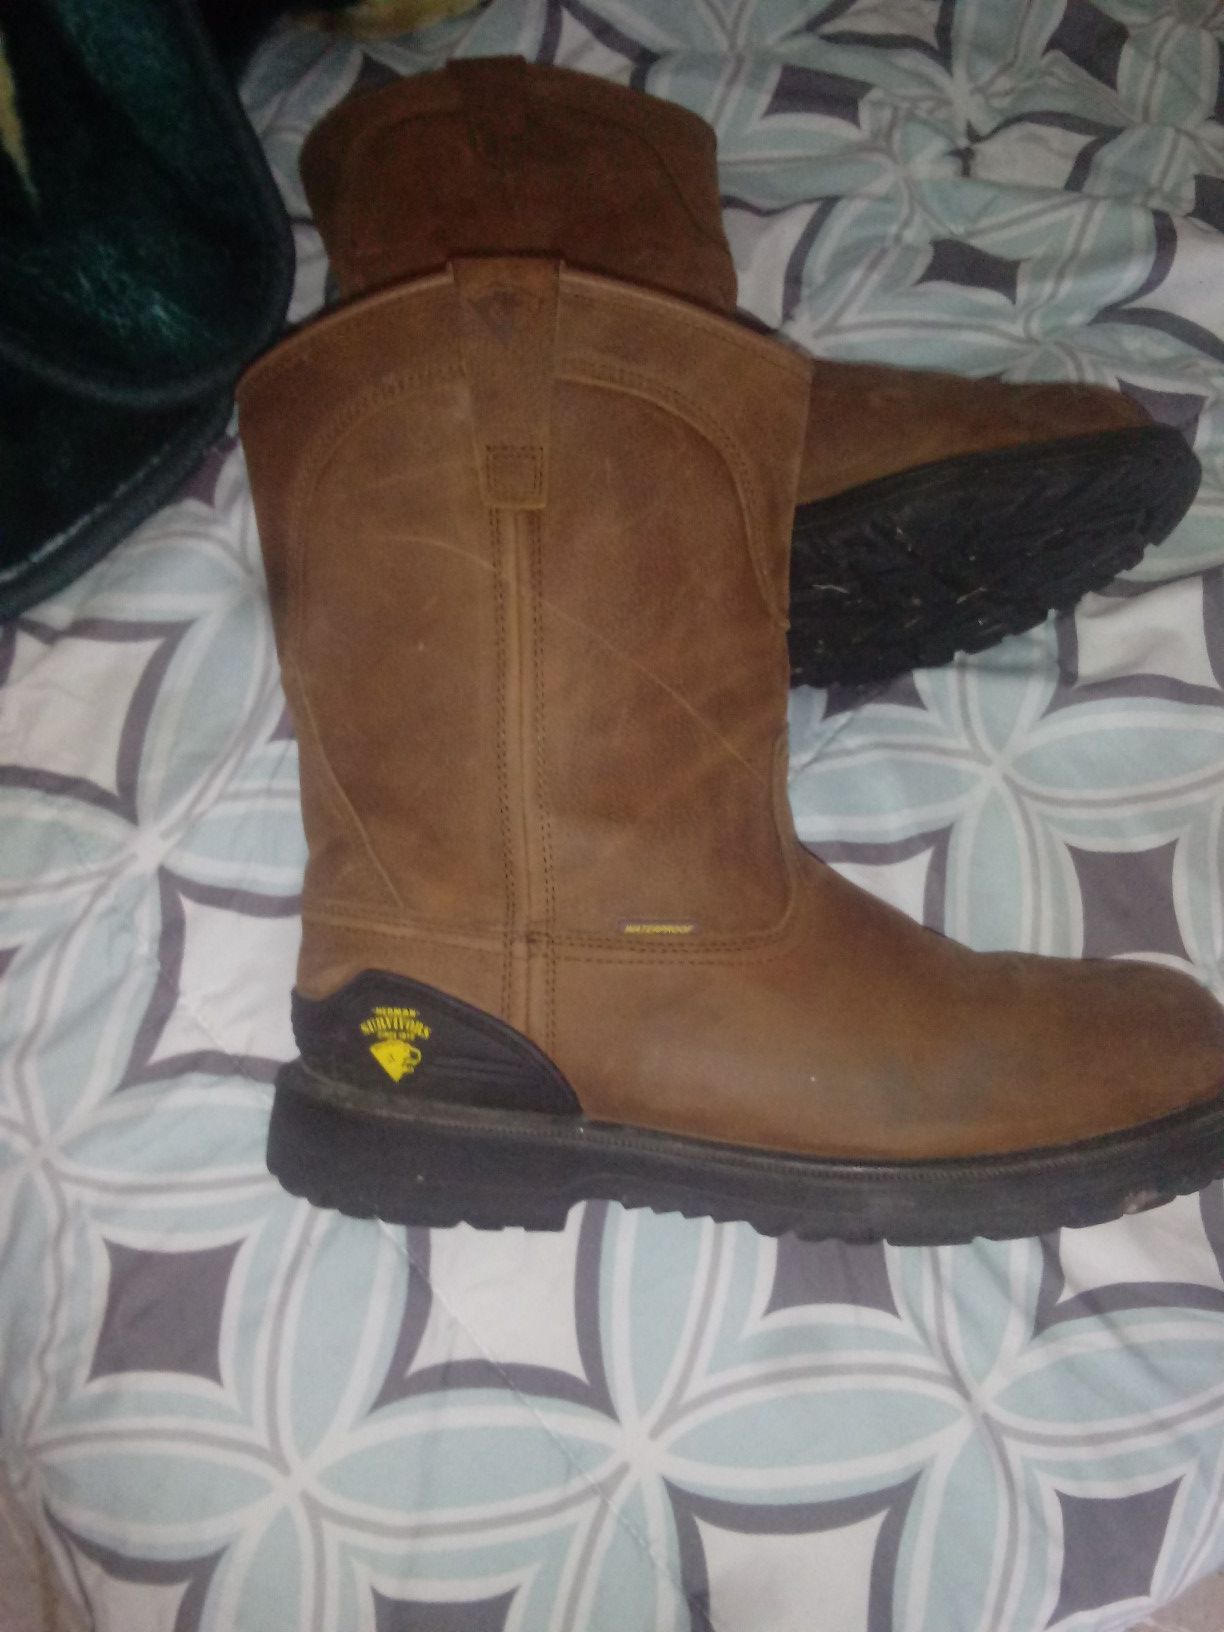 Size 13 slip resistant steel toe boots brand new only wore for 5 min.